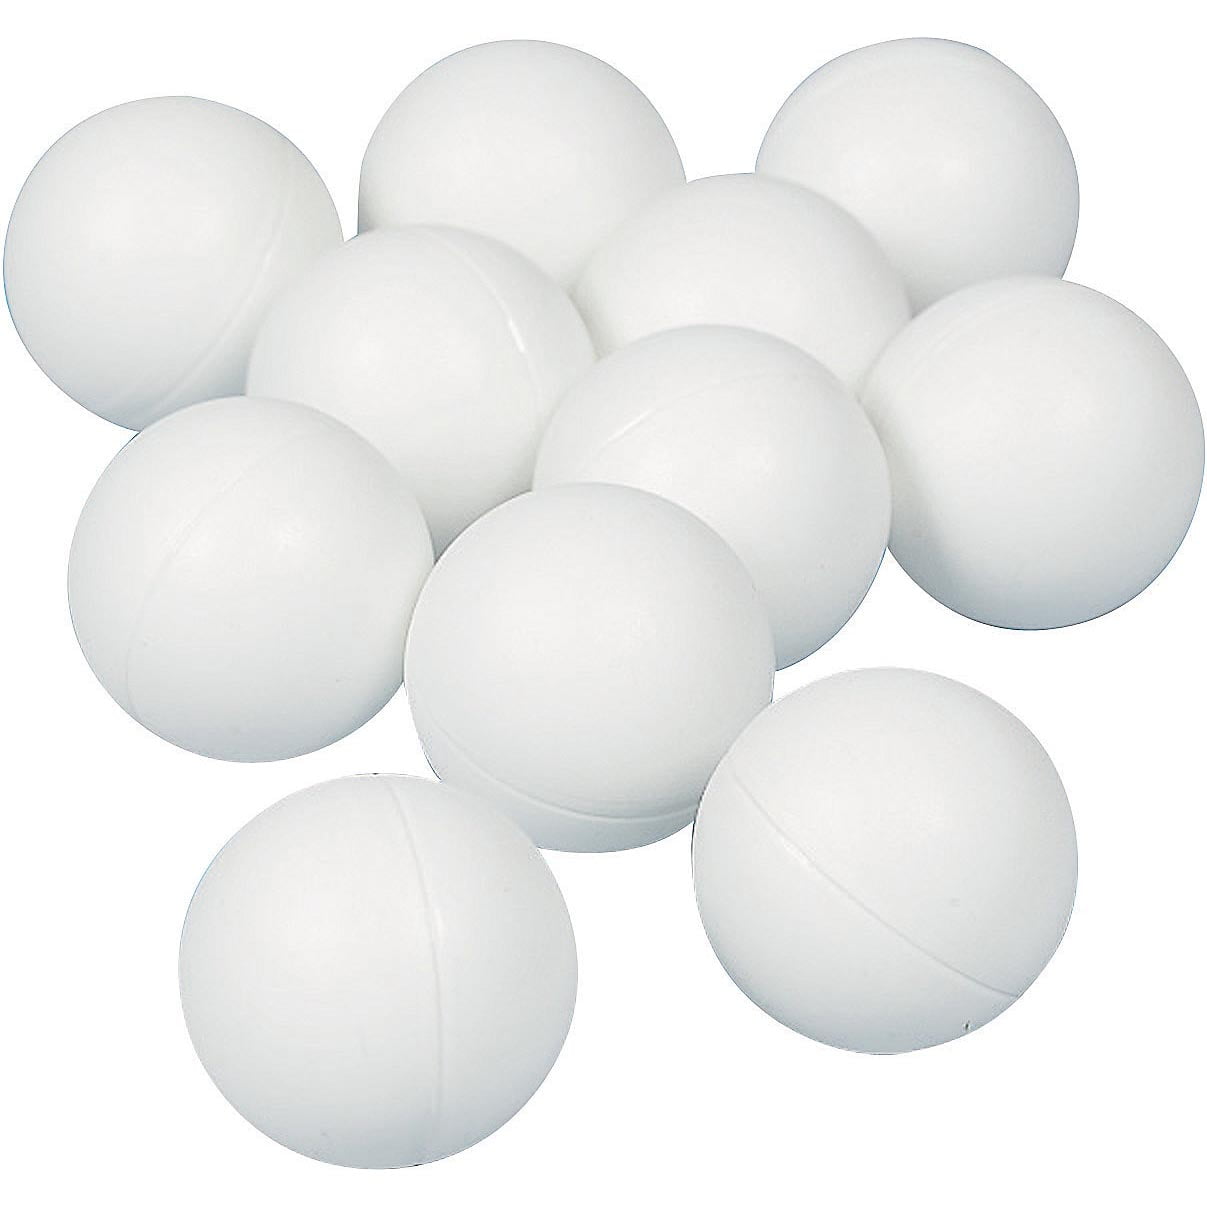 Lot of 36 Ping Pong Balls Washable Drinking Beer Pong Table tennis White